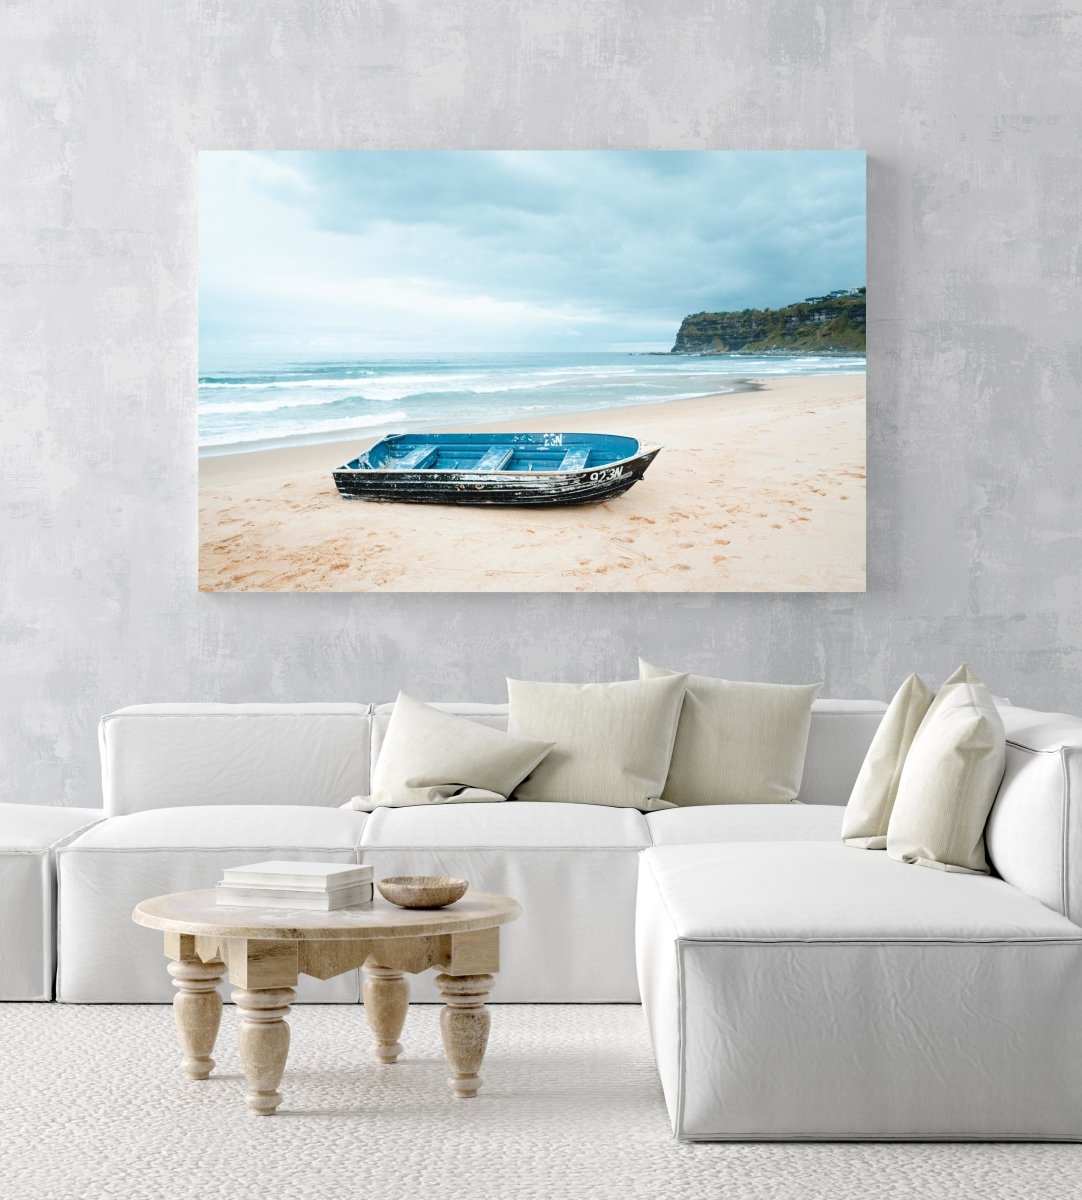 Stranded blue boat on northern beaches on cloudy day in an acrylic/perspex frame